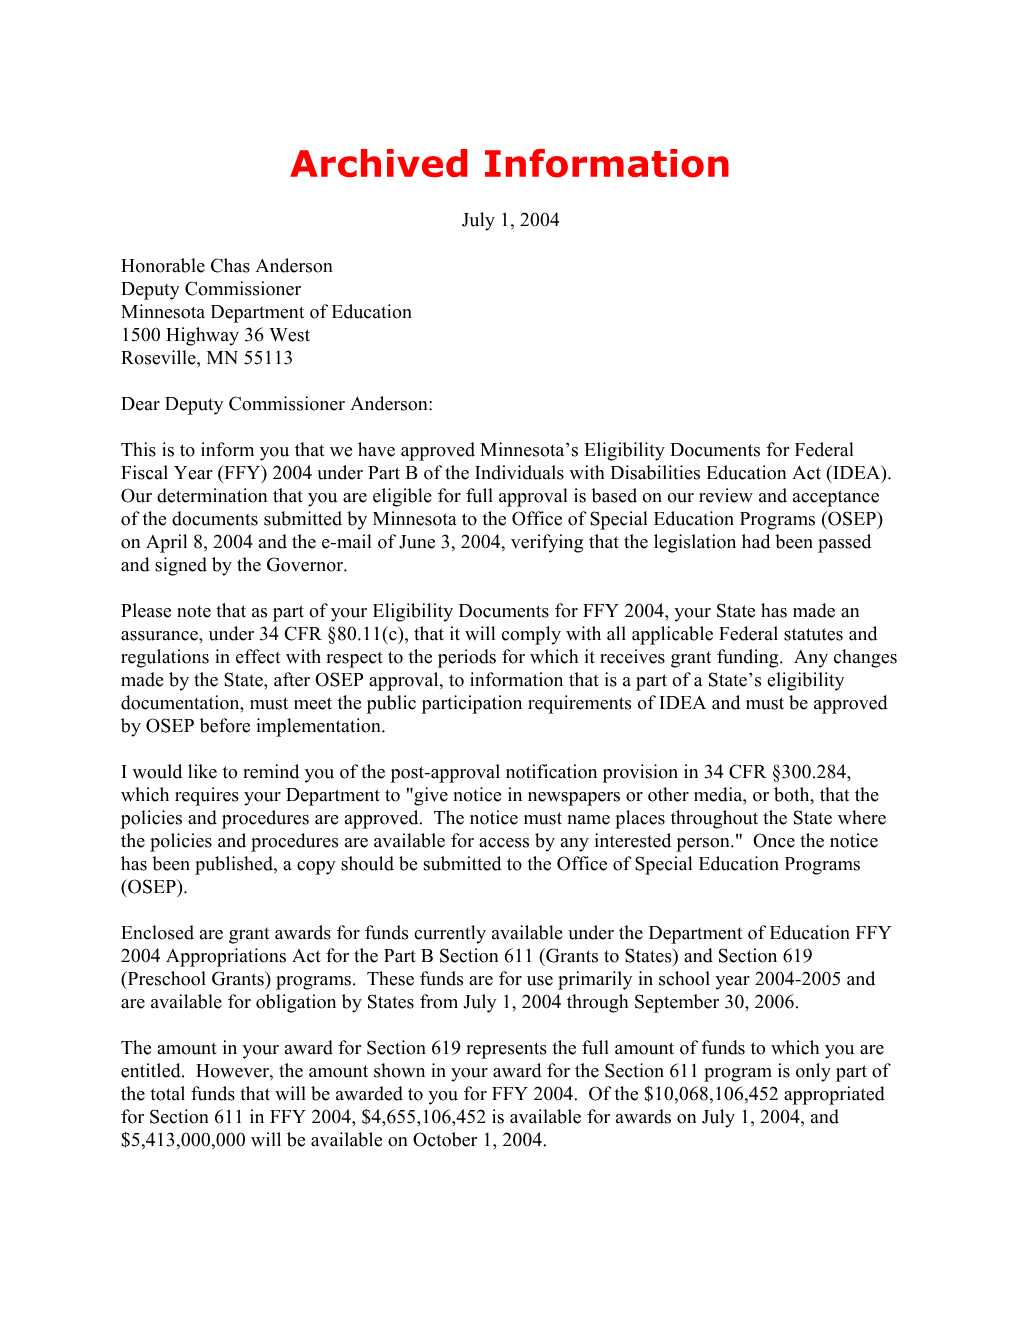 Archived Information: 2004 Minnesota Individuals with Disabilities Act (IDEA) Part B Grant